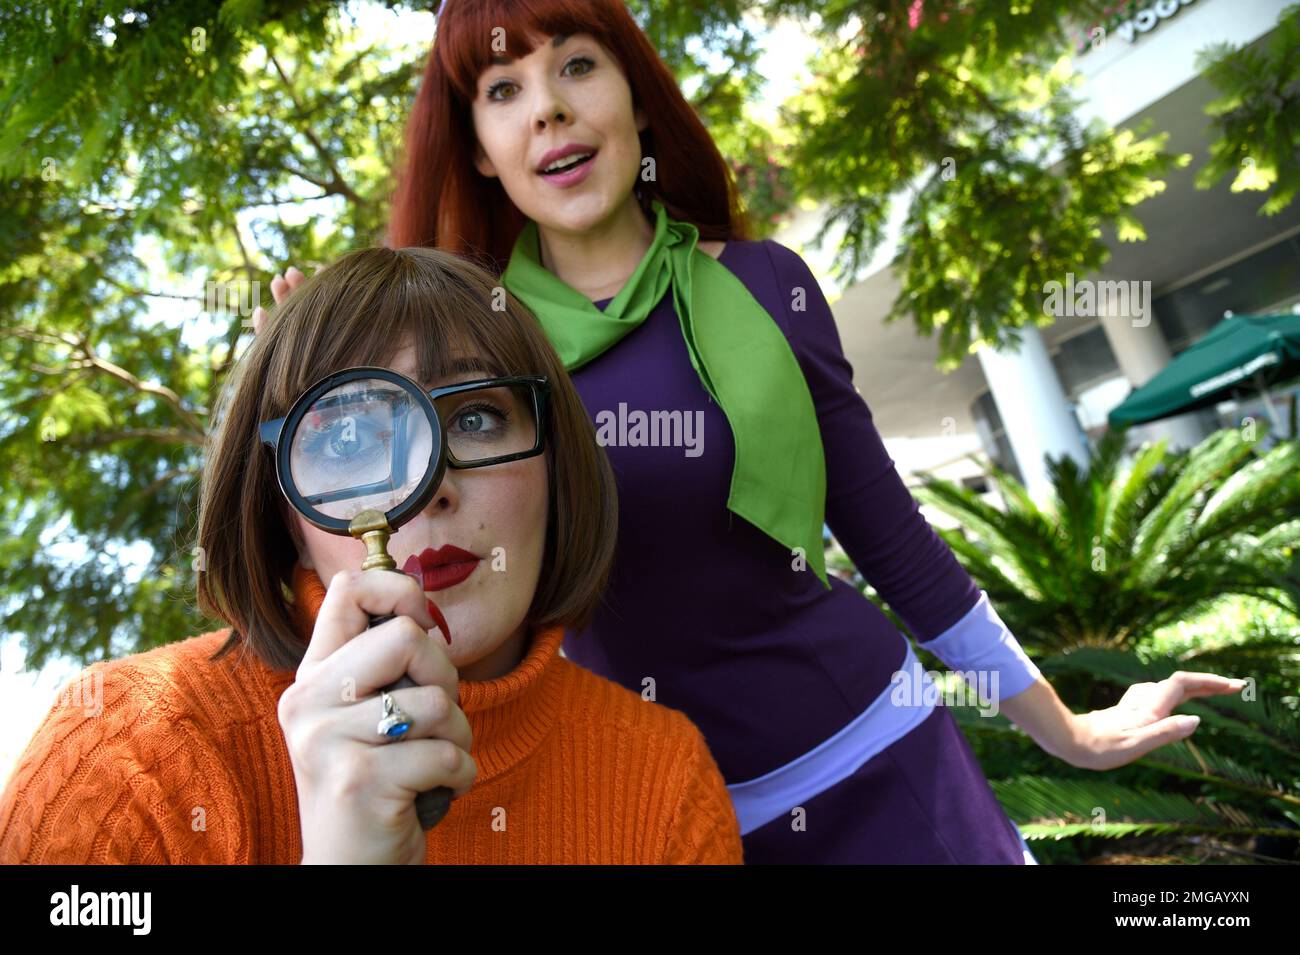 Velma From Scooby Doo Cosplay Stock Photo - Download Image Now